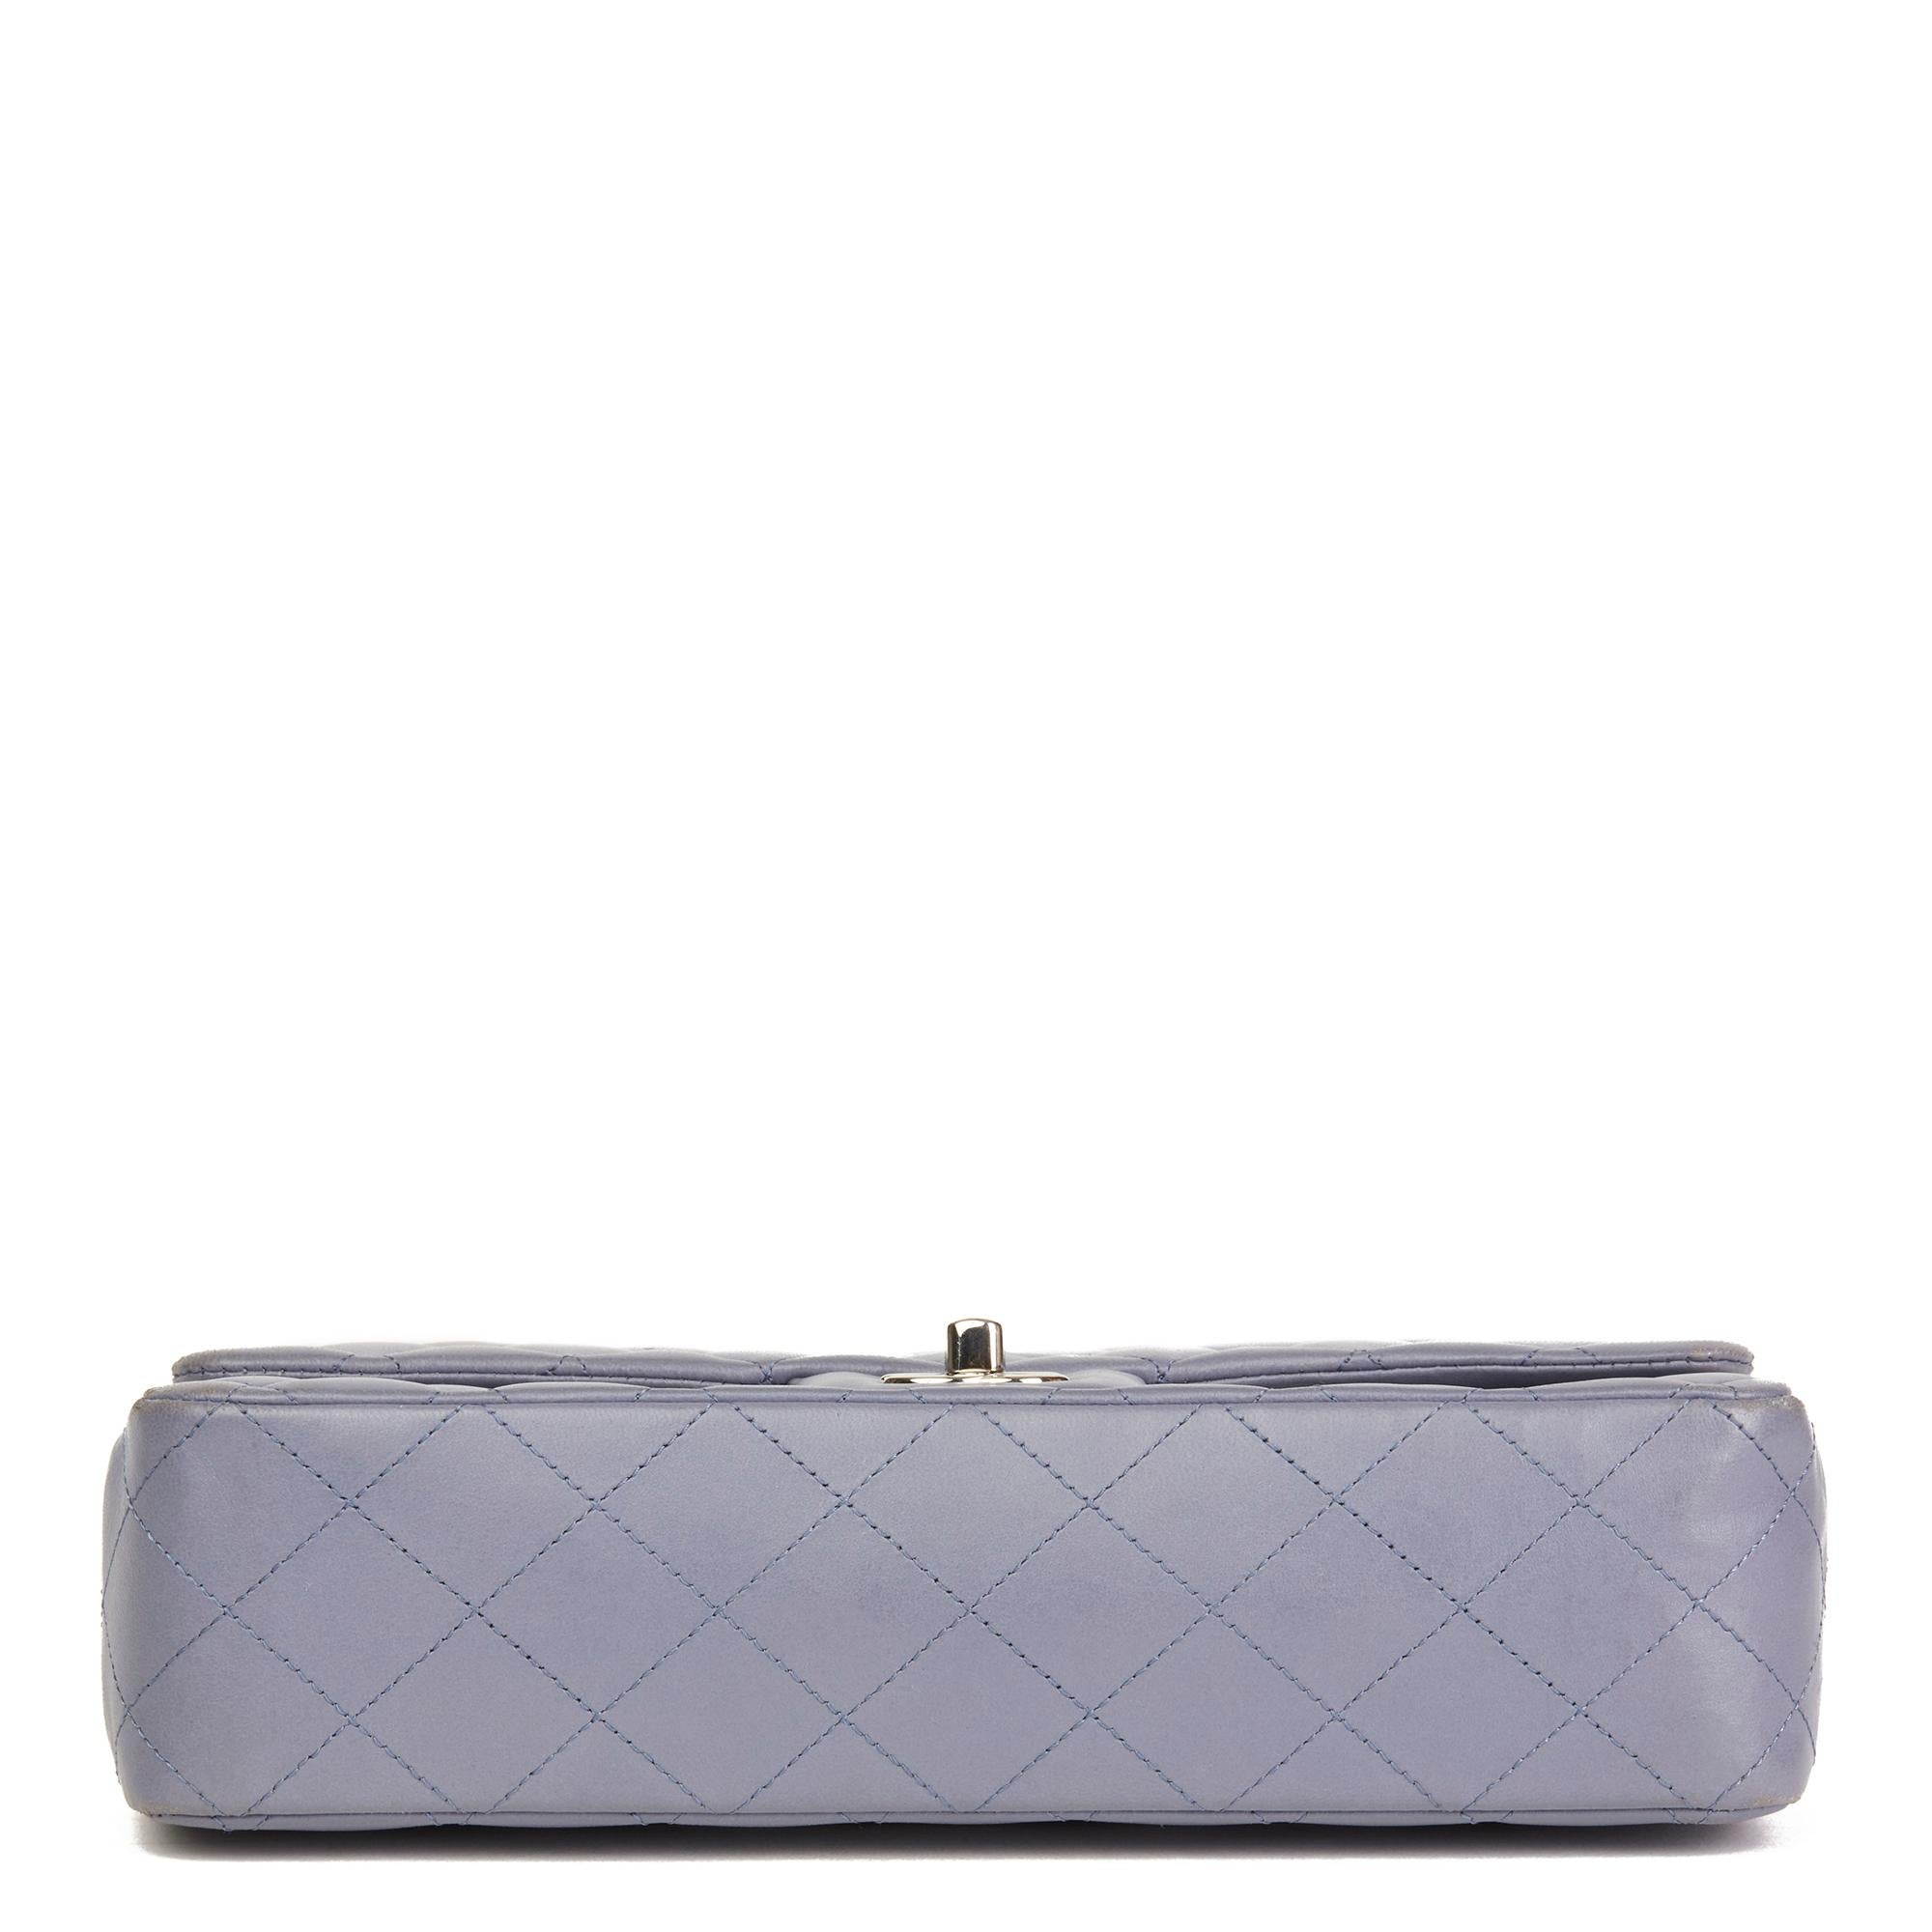 Gray 2011 Chanel Lilac Quilted Lambskin Medium Classic Double Flap Bag